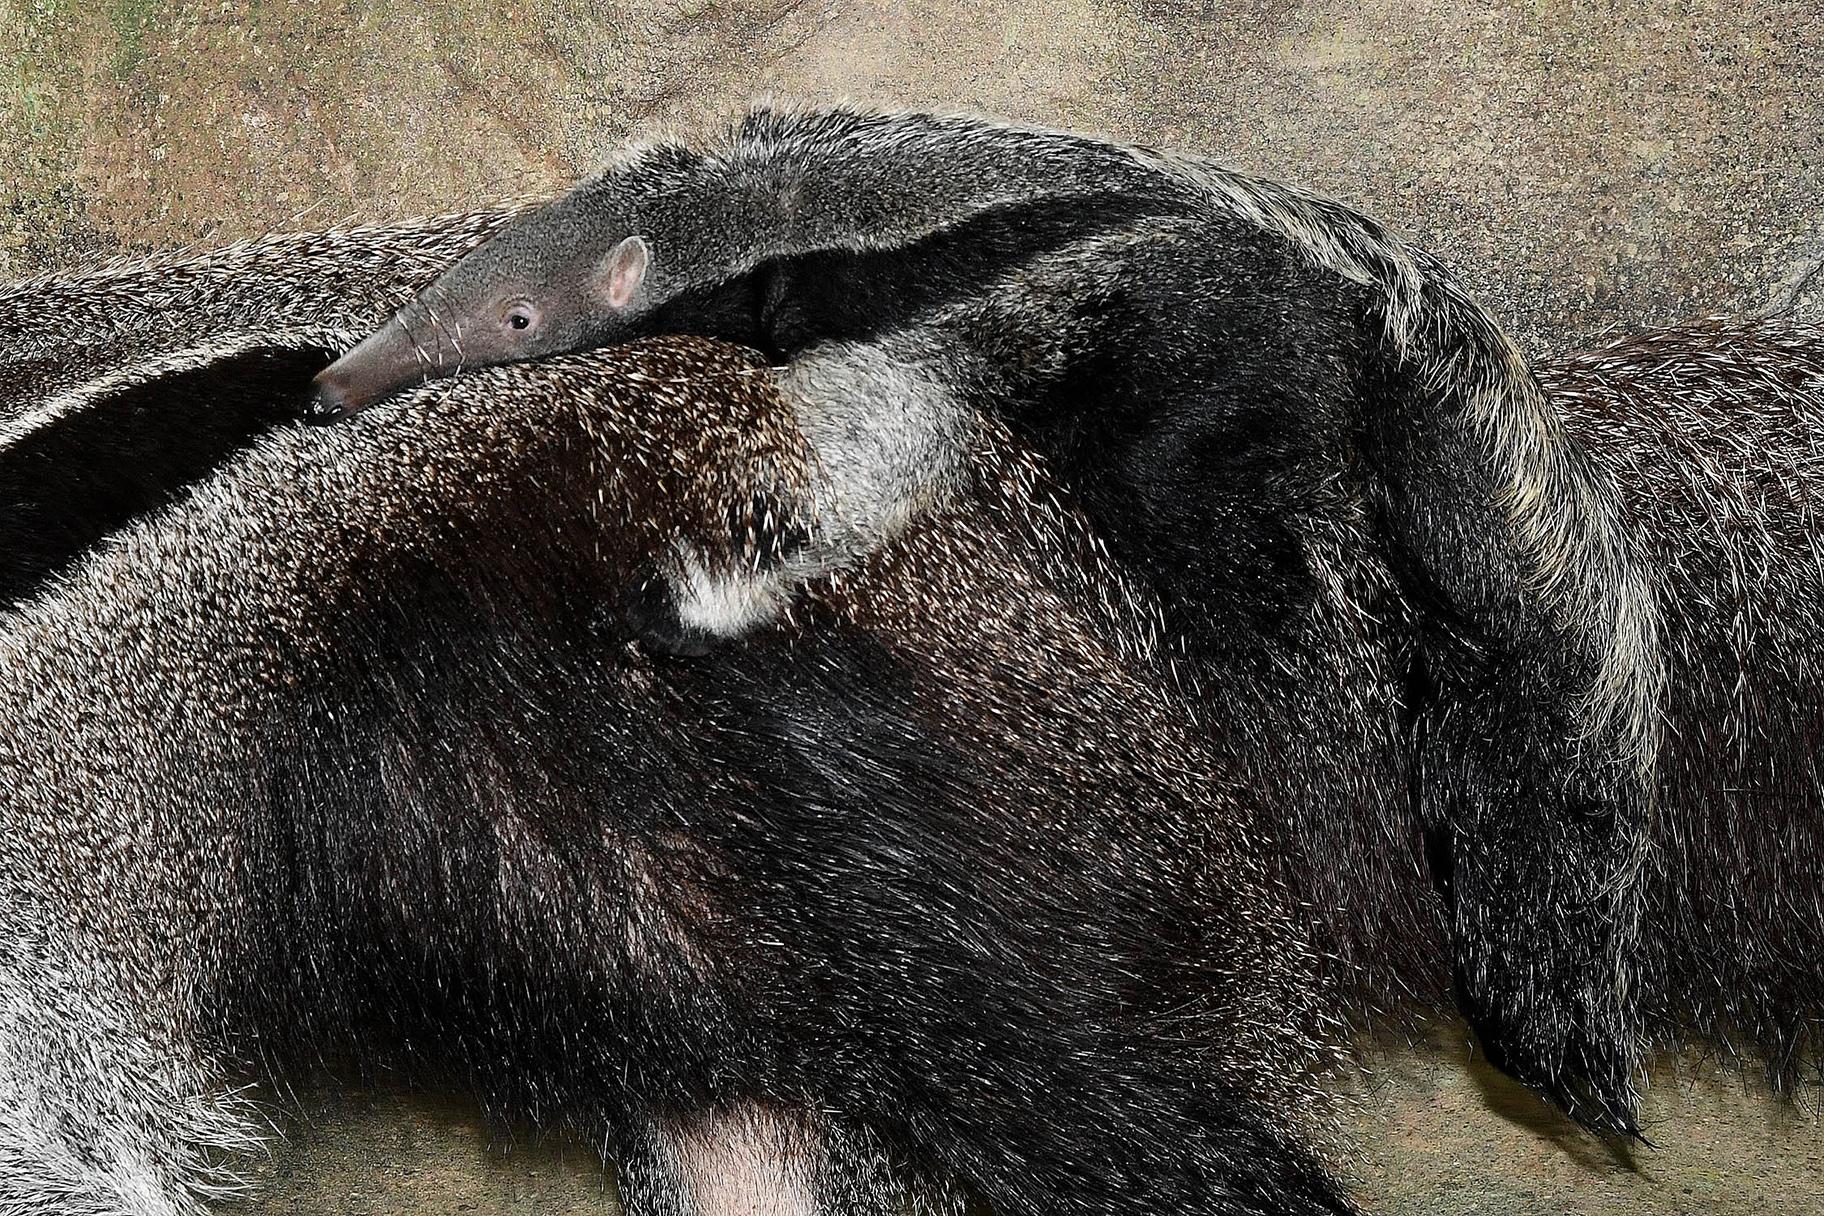 A male giant anteater pup was born at Brookfield Zoo on Dec. 15, 2018. (Jim Schulz / Chicago Zoological Society)